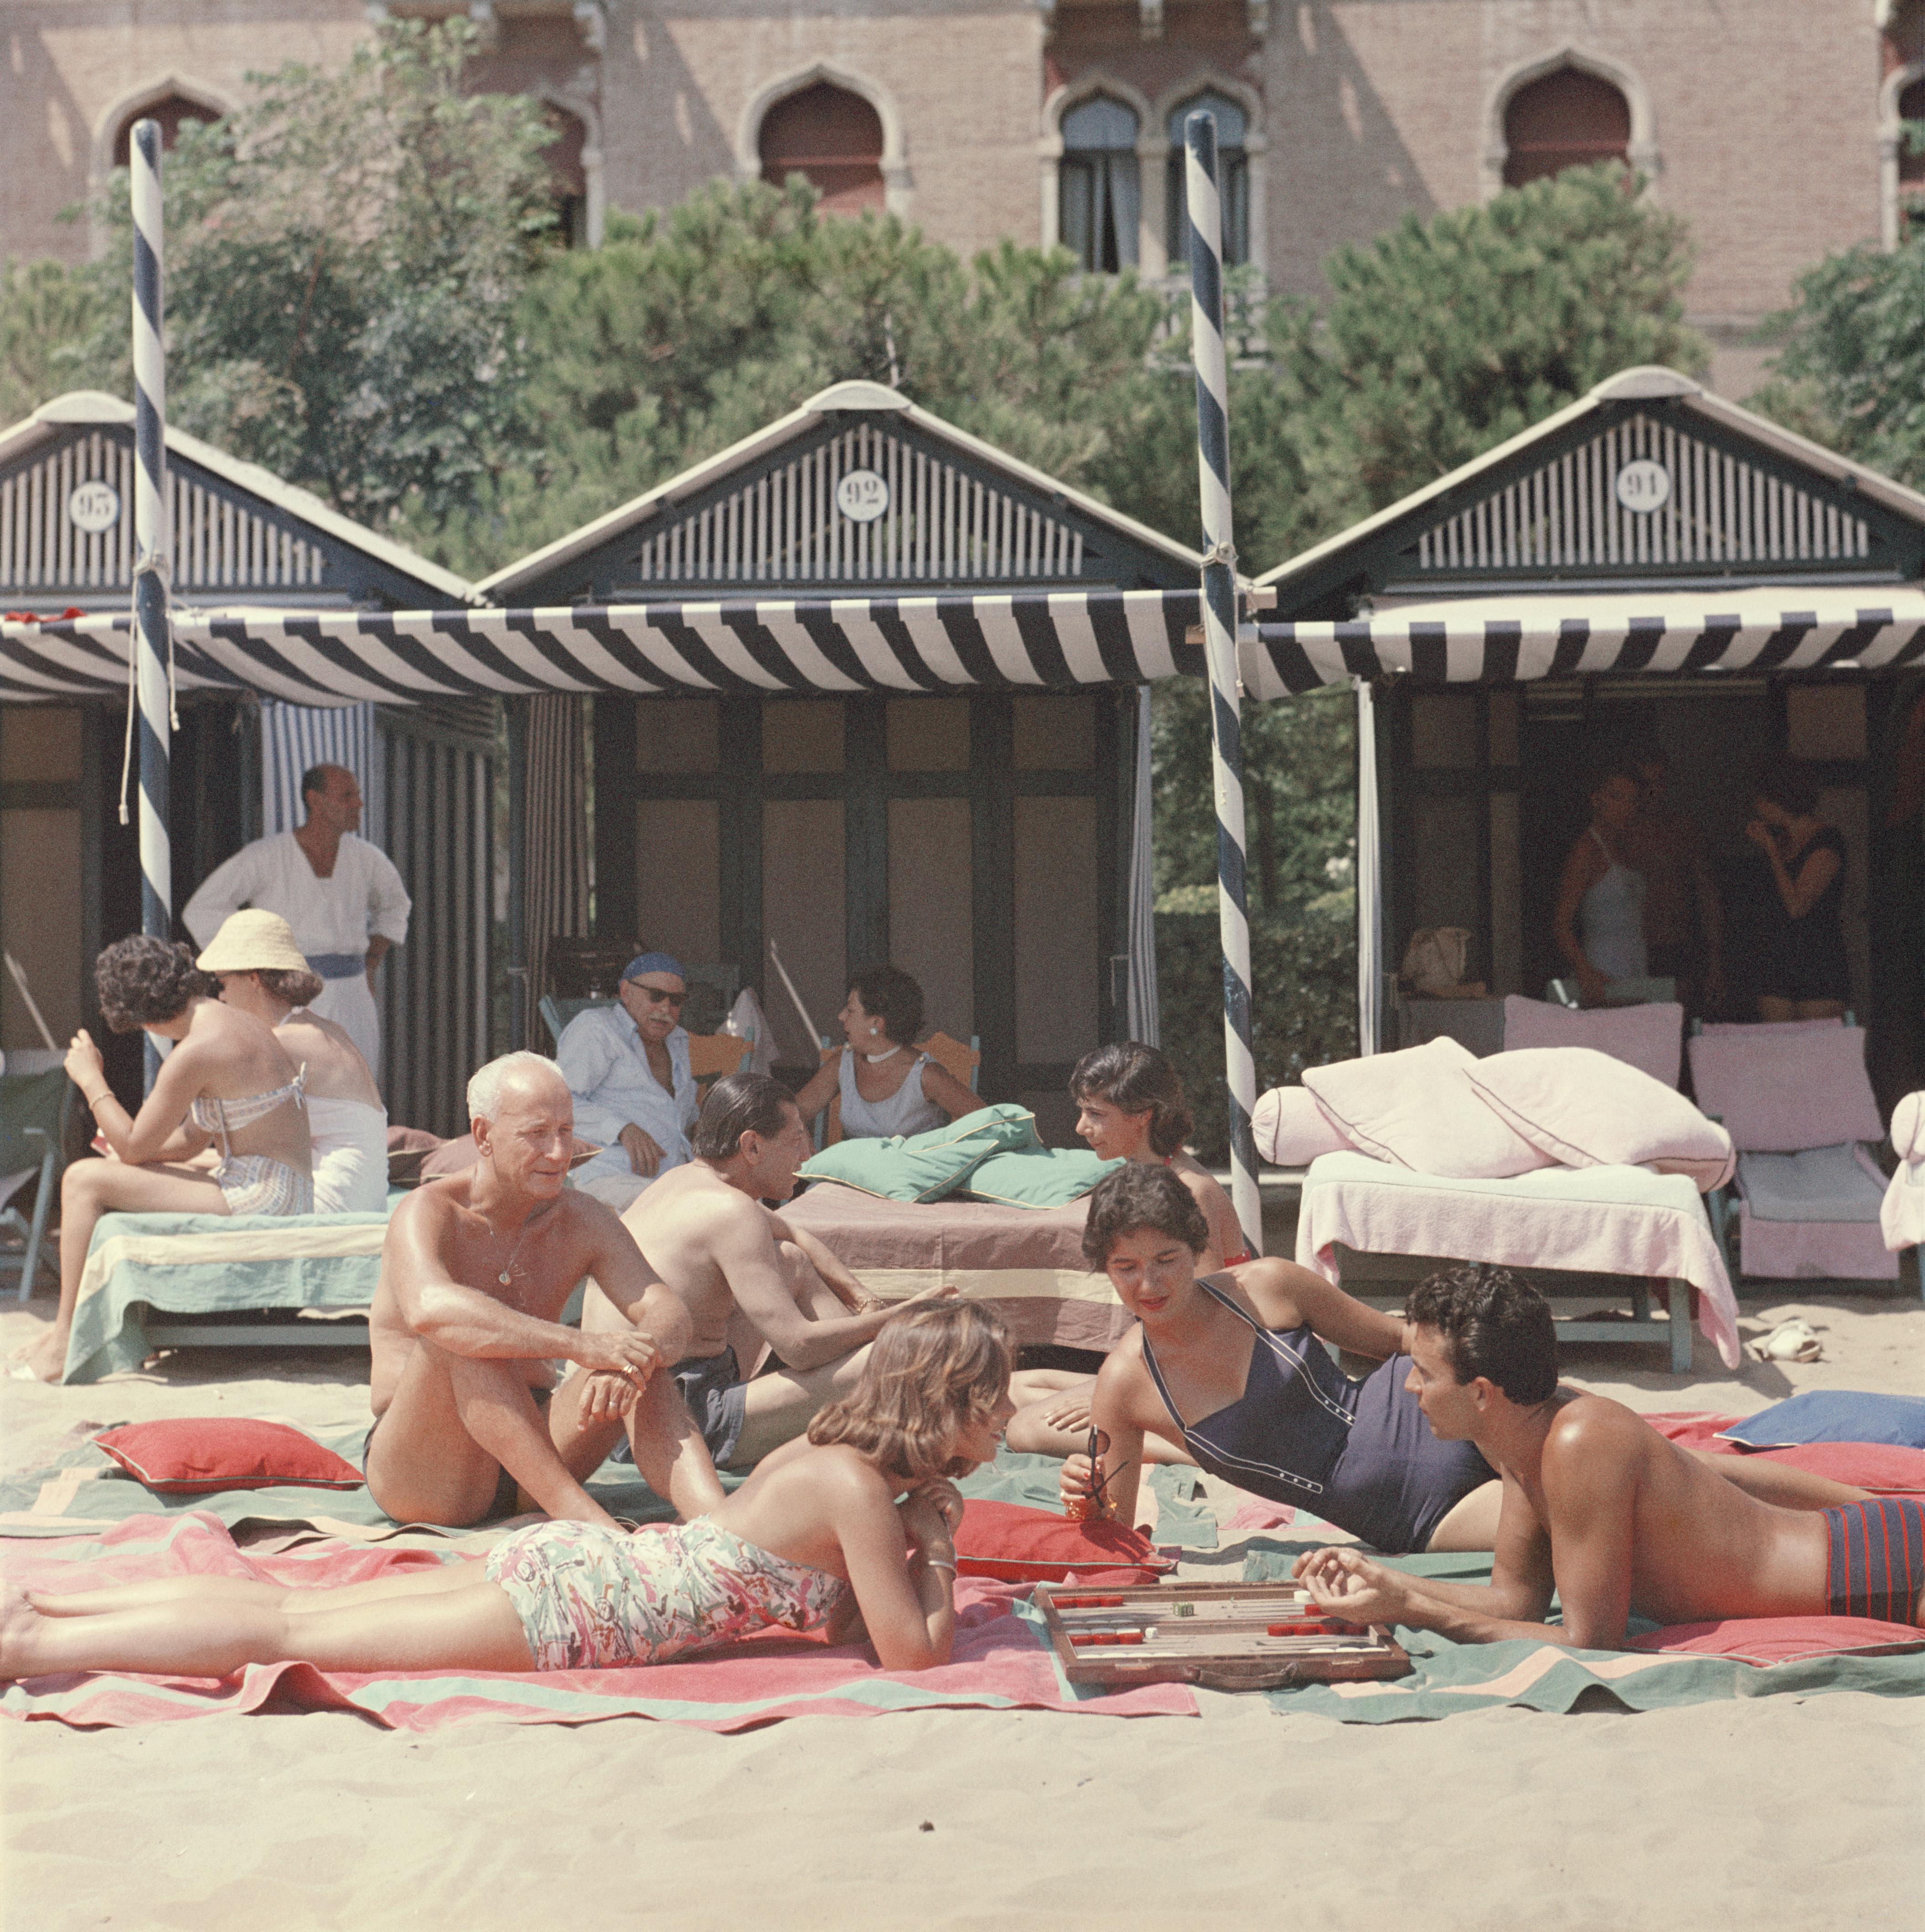 Beach Backgammon
1957
C print 
Estate stamped and hand numbered edition of 150 with certificate of authenticity from the estate.   

CAPTION: Backgammon on the beach at the Hotel Excelsior on the Venice Lido, Italy, 1957.

Slim Aarons, an acclaimed